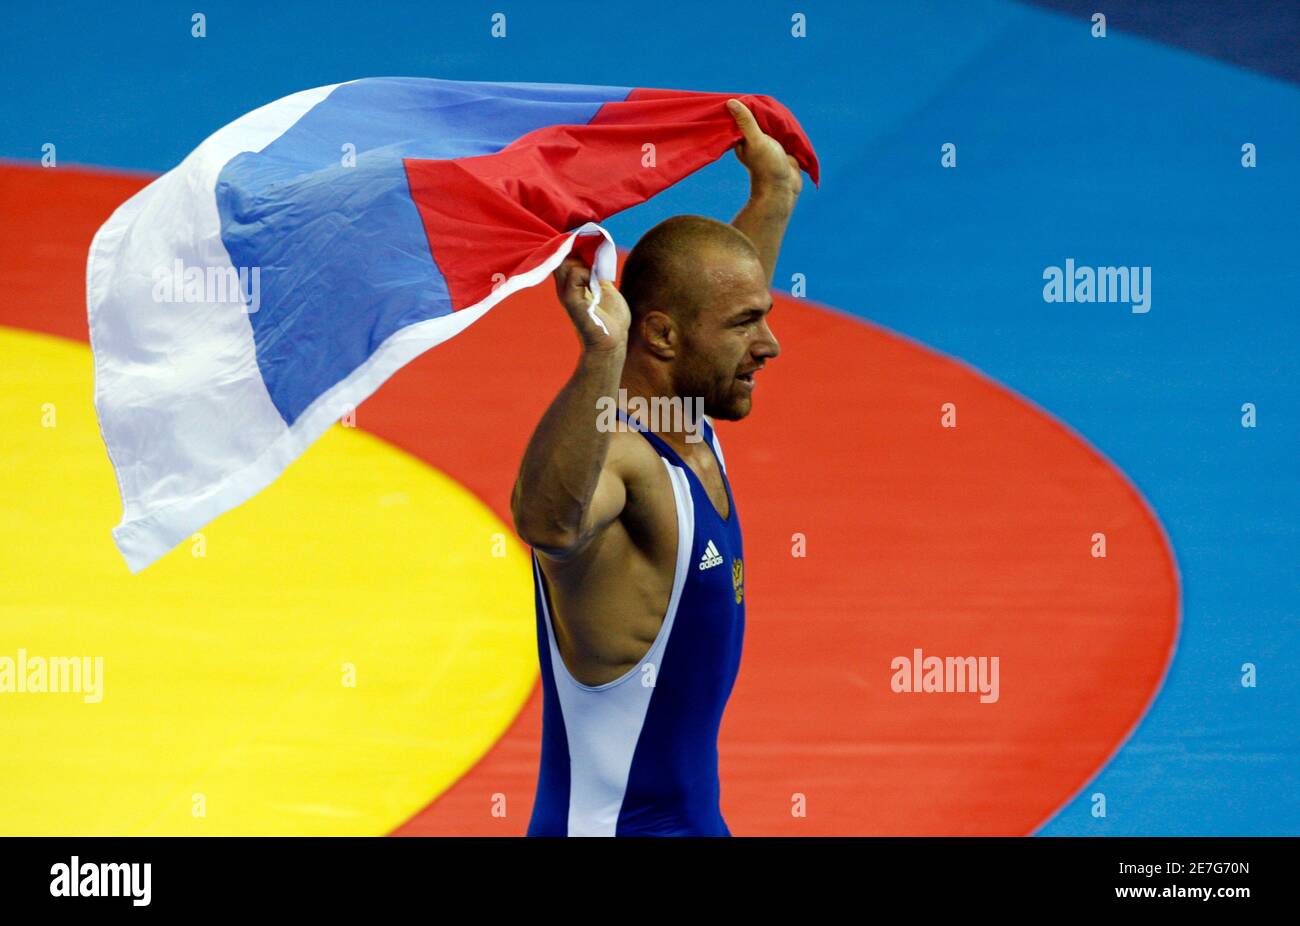 Aslanbek Khushtov of Russia celebrates after defeating Mirko Englich of Germany at the men's 96kg Greco-Roman gold medal wrestling competition at the Beijing 2008 Olympic Games August 14, 2008.     REUTERS/Oleg Popov (CHINA) Stock Photo